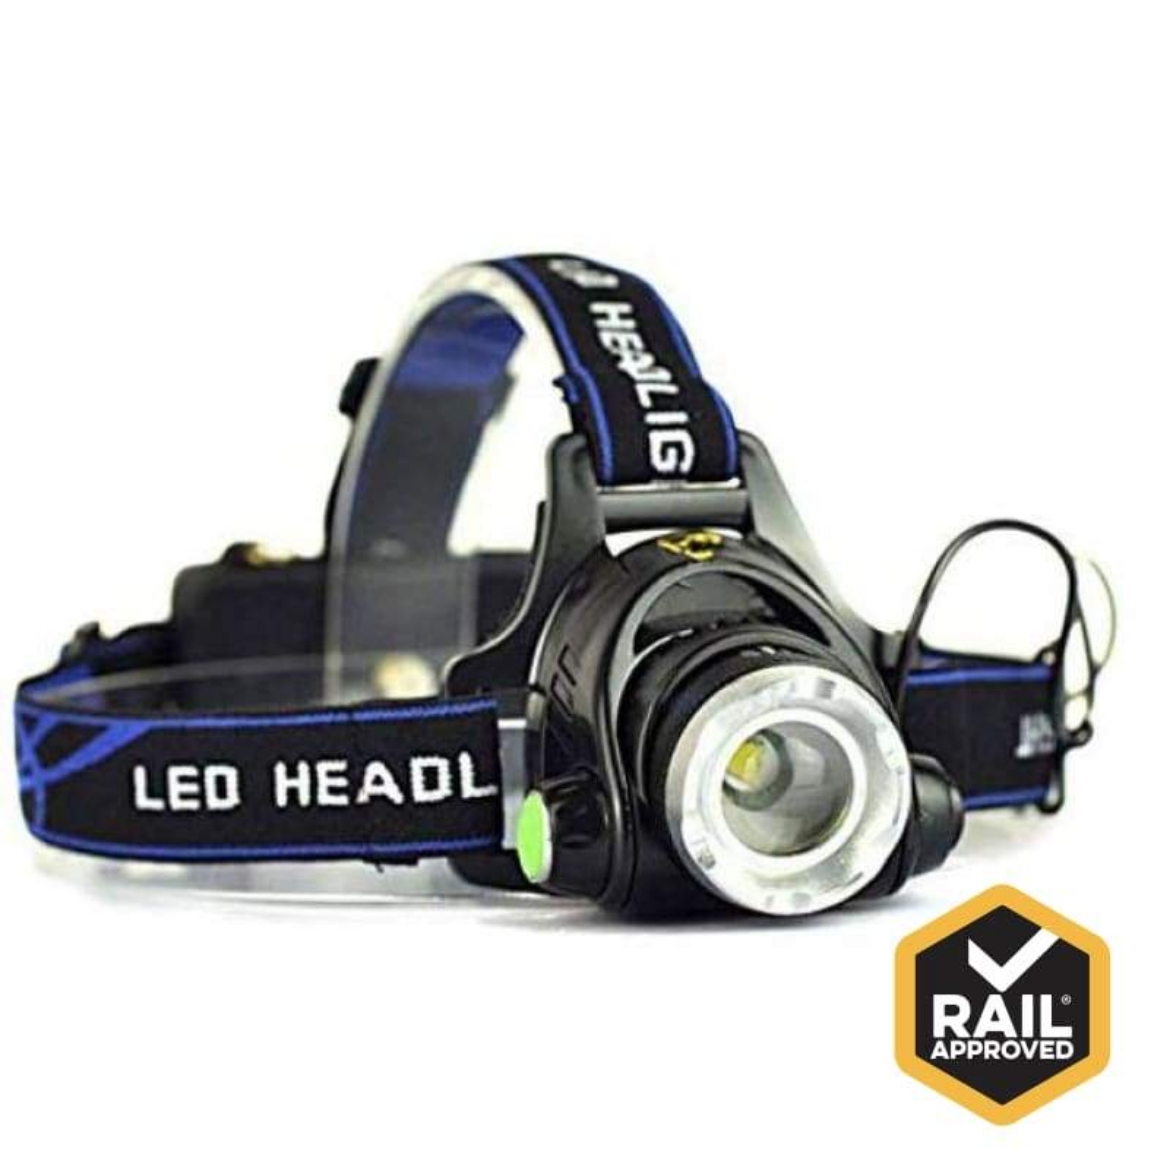 Picture of Rail Approved LED Headlamp Torch Kit 2 x Battery Packs & Chargers